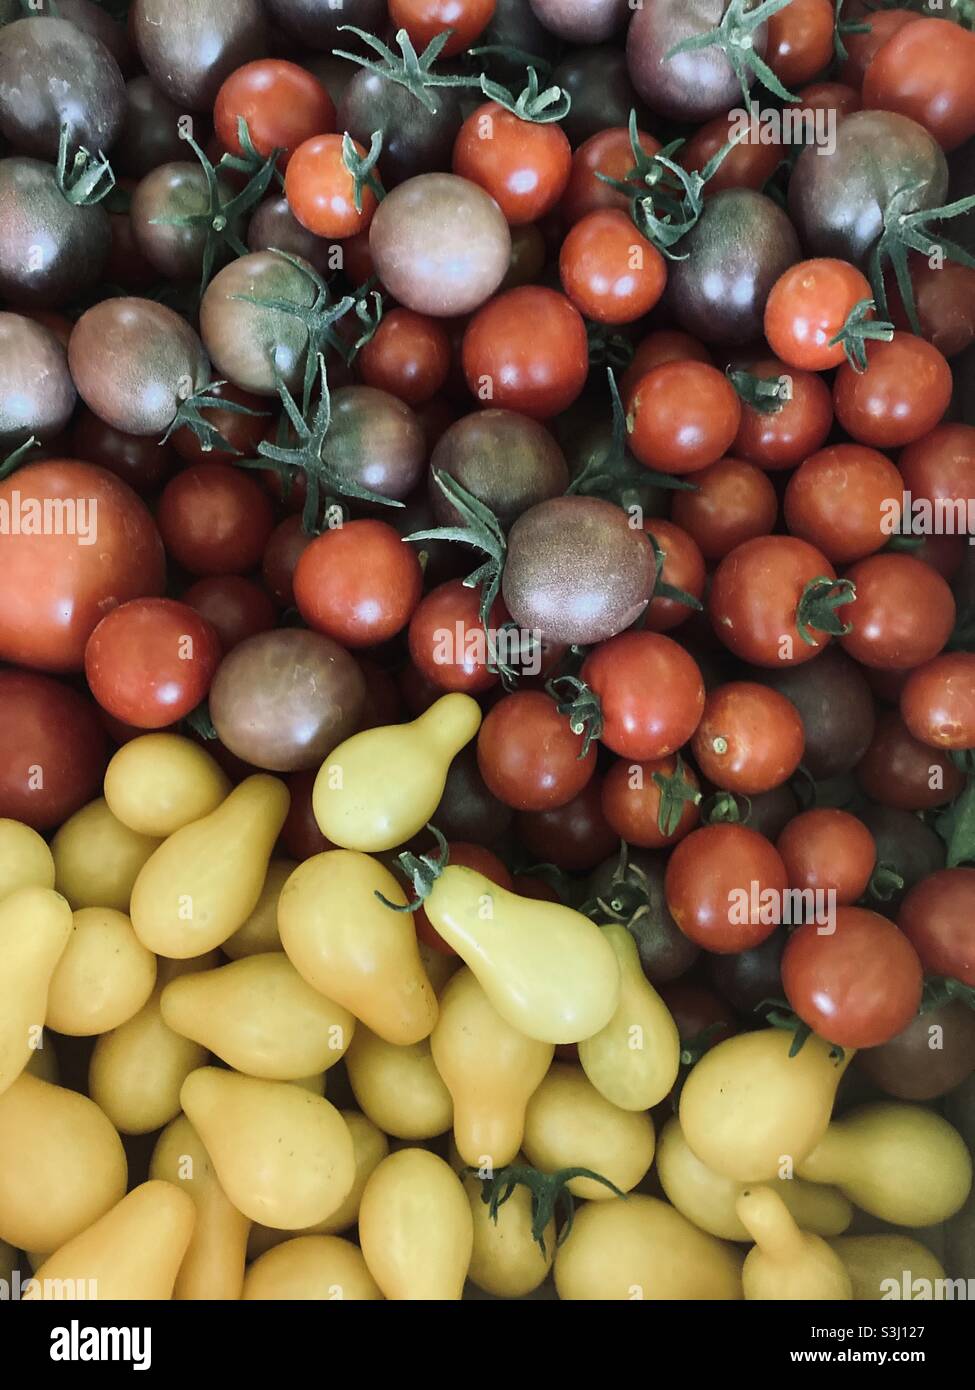 Tomatoes after harvest. Stock Photo